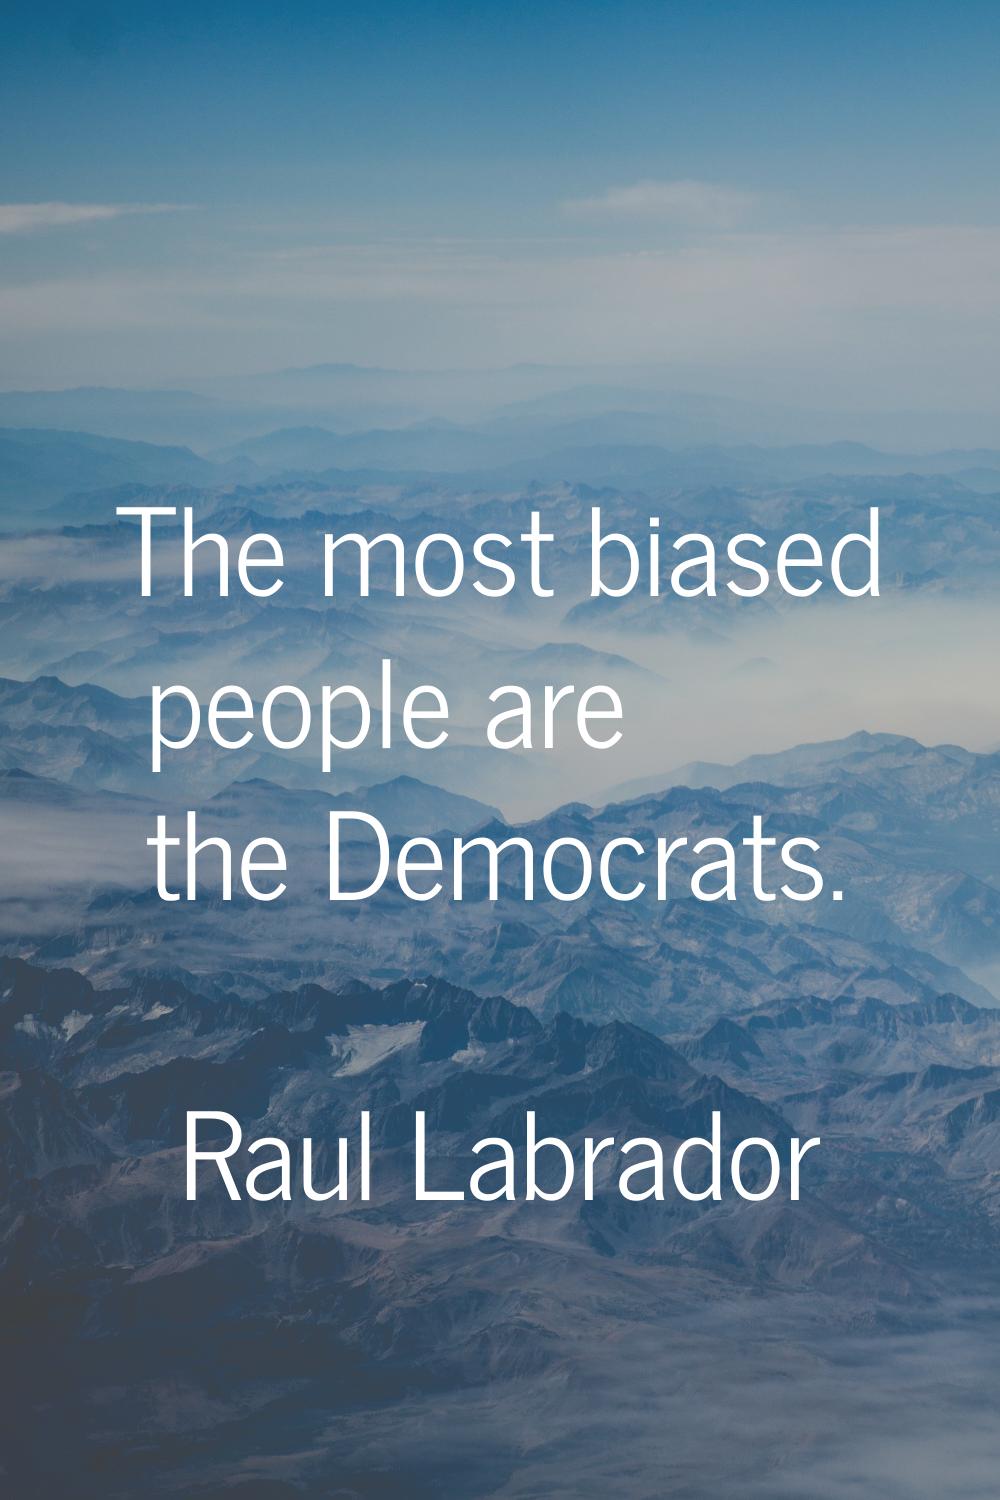 The most biased people are the Democrats.